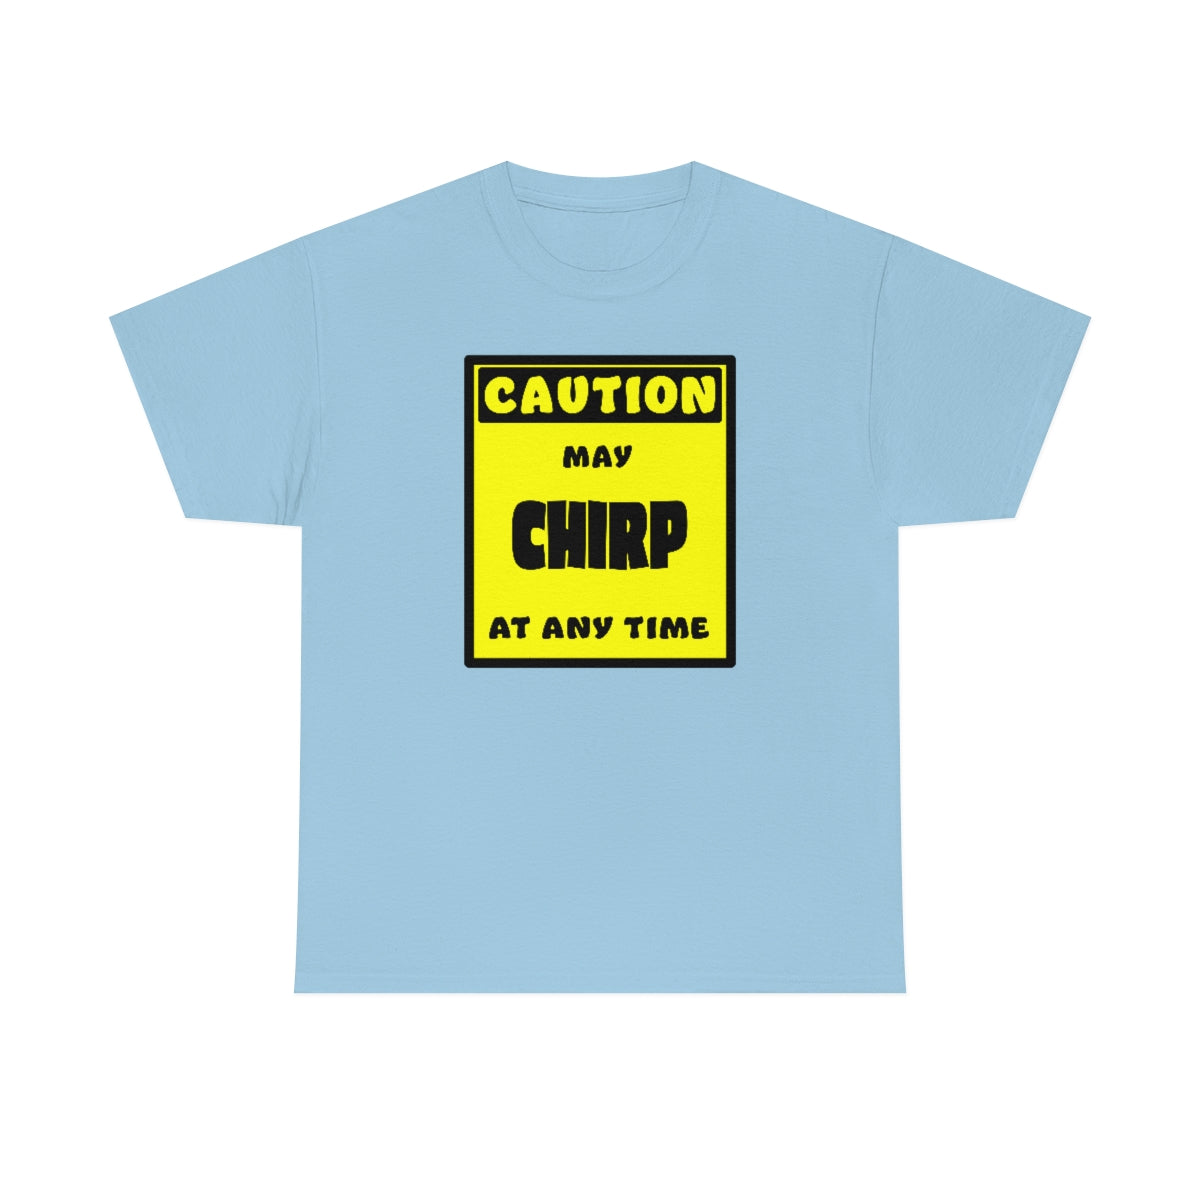 CAUTION! May CHIRP at any time! - T-Shirt T-Shirt AFLT-Whootorca Light Blue S 